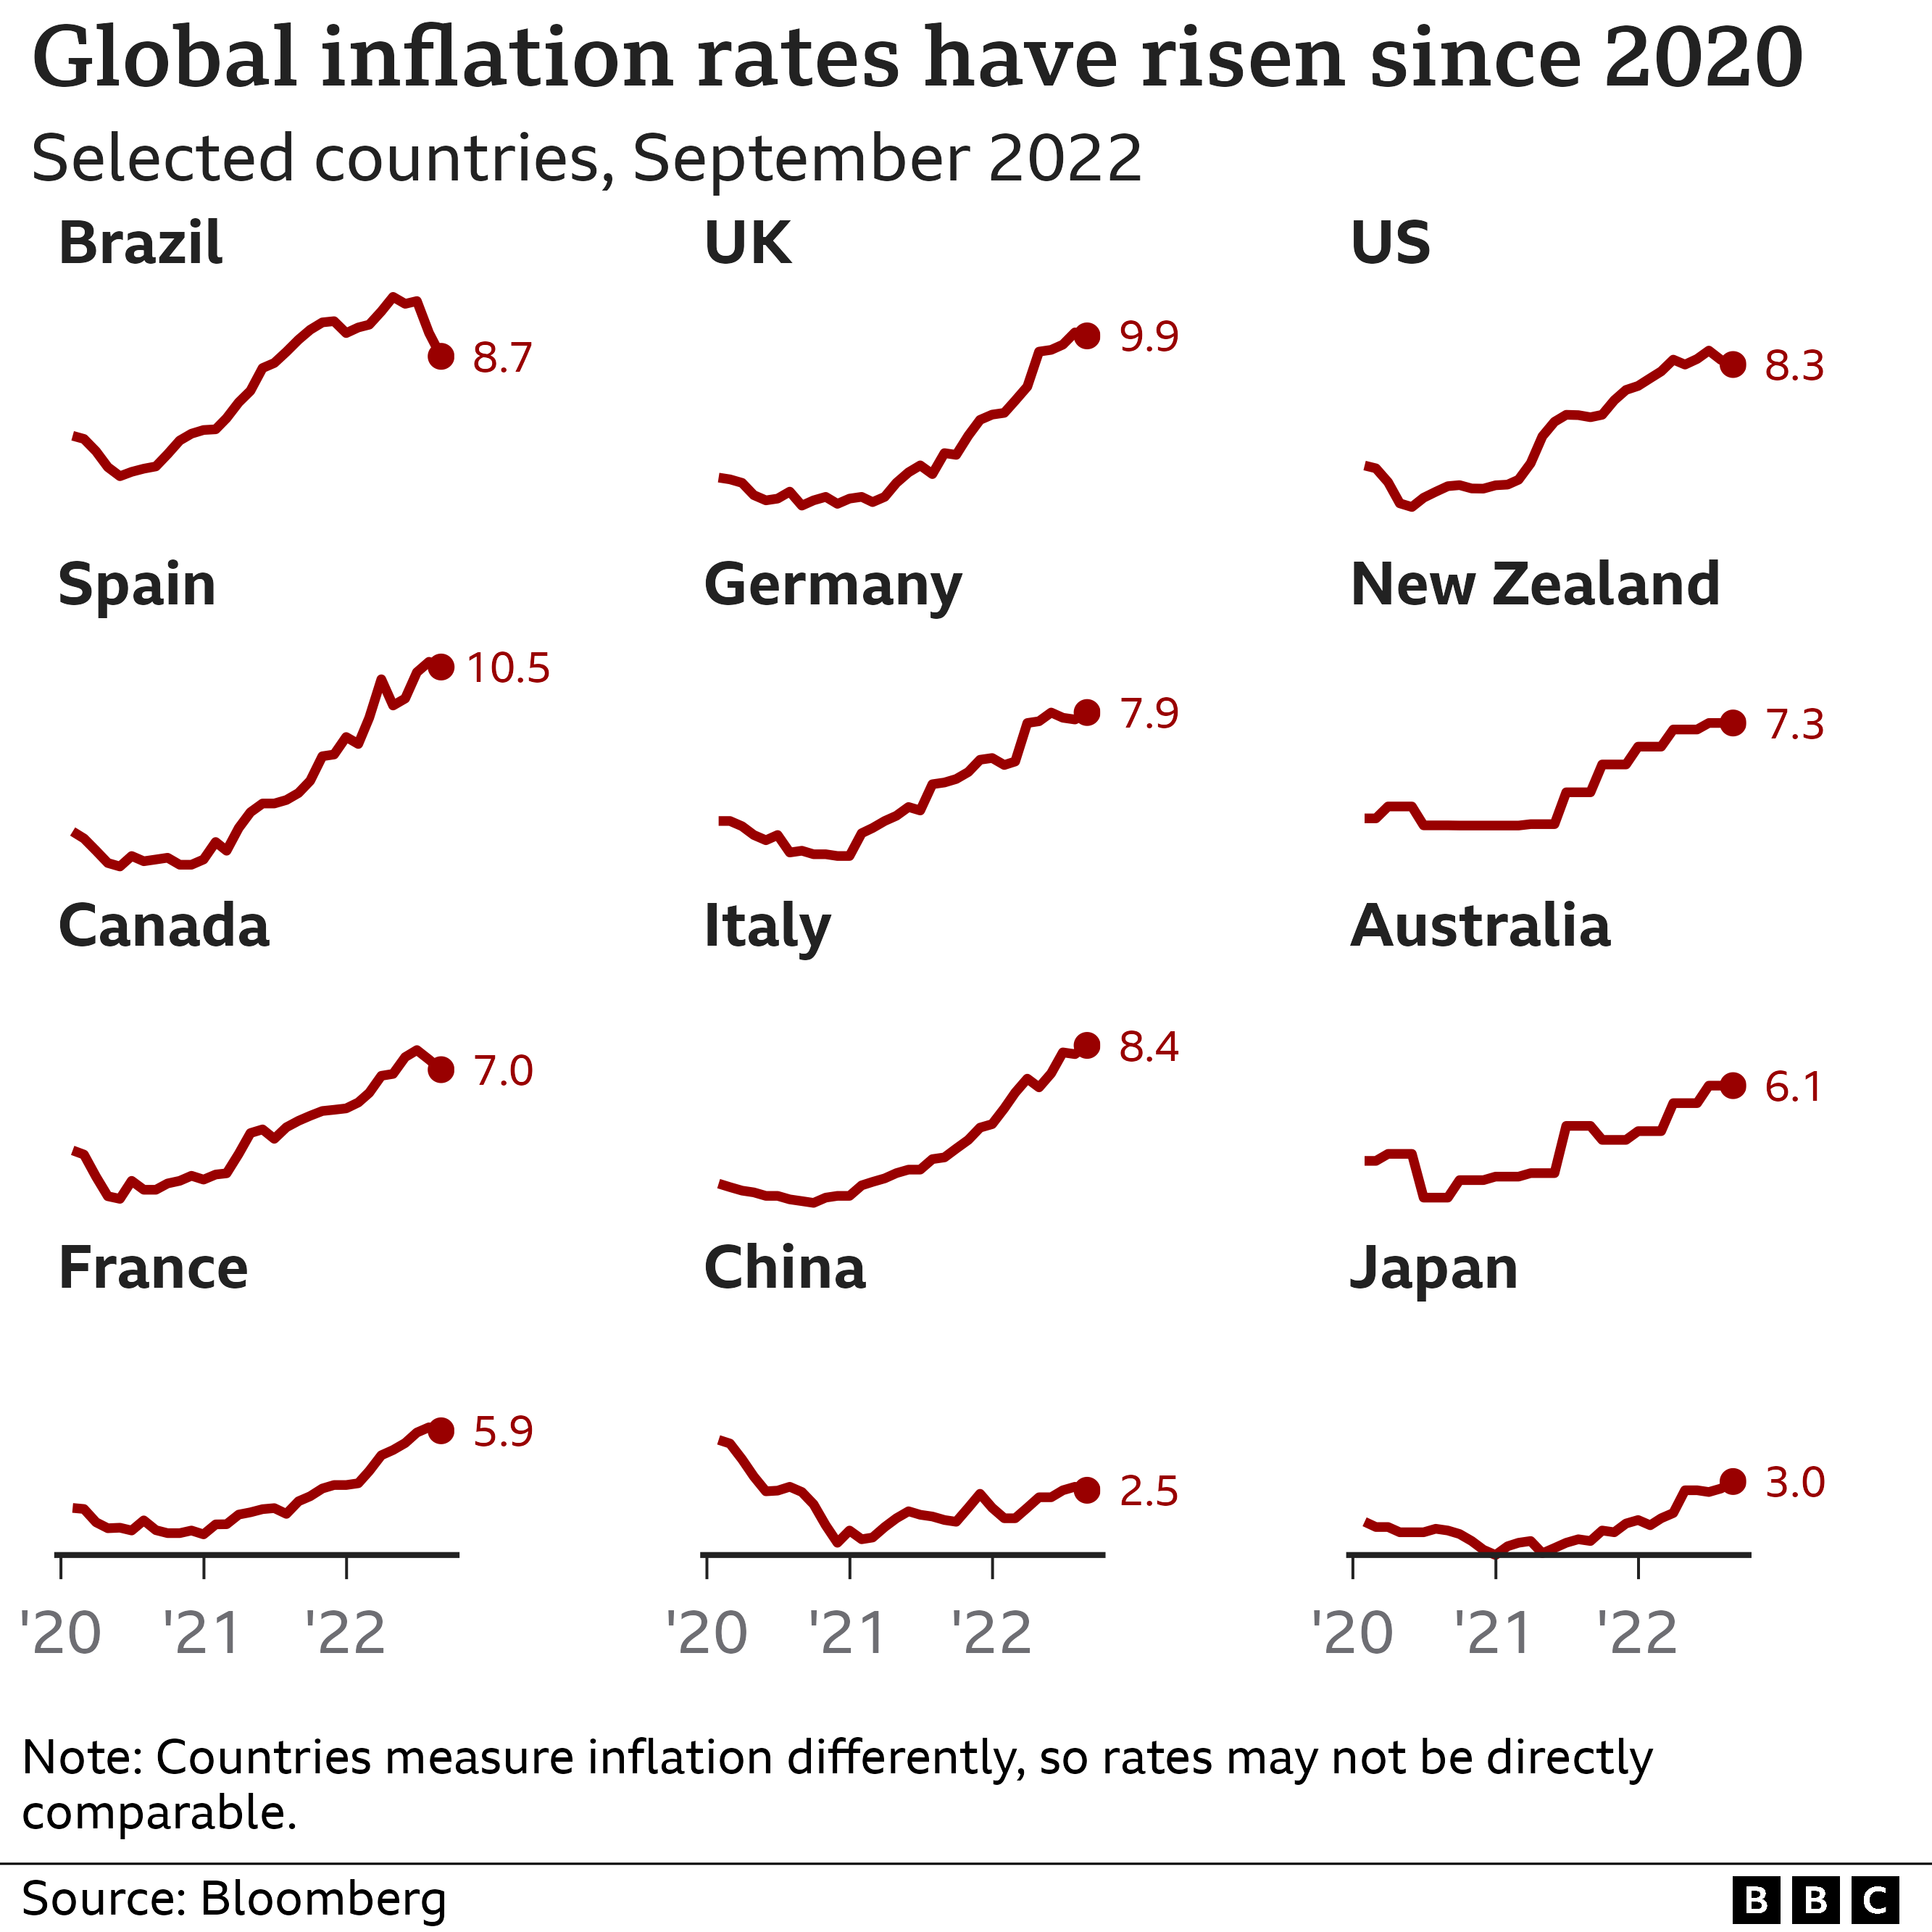 Inflation is a global problem